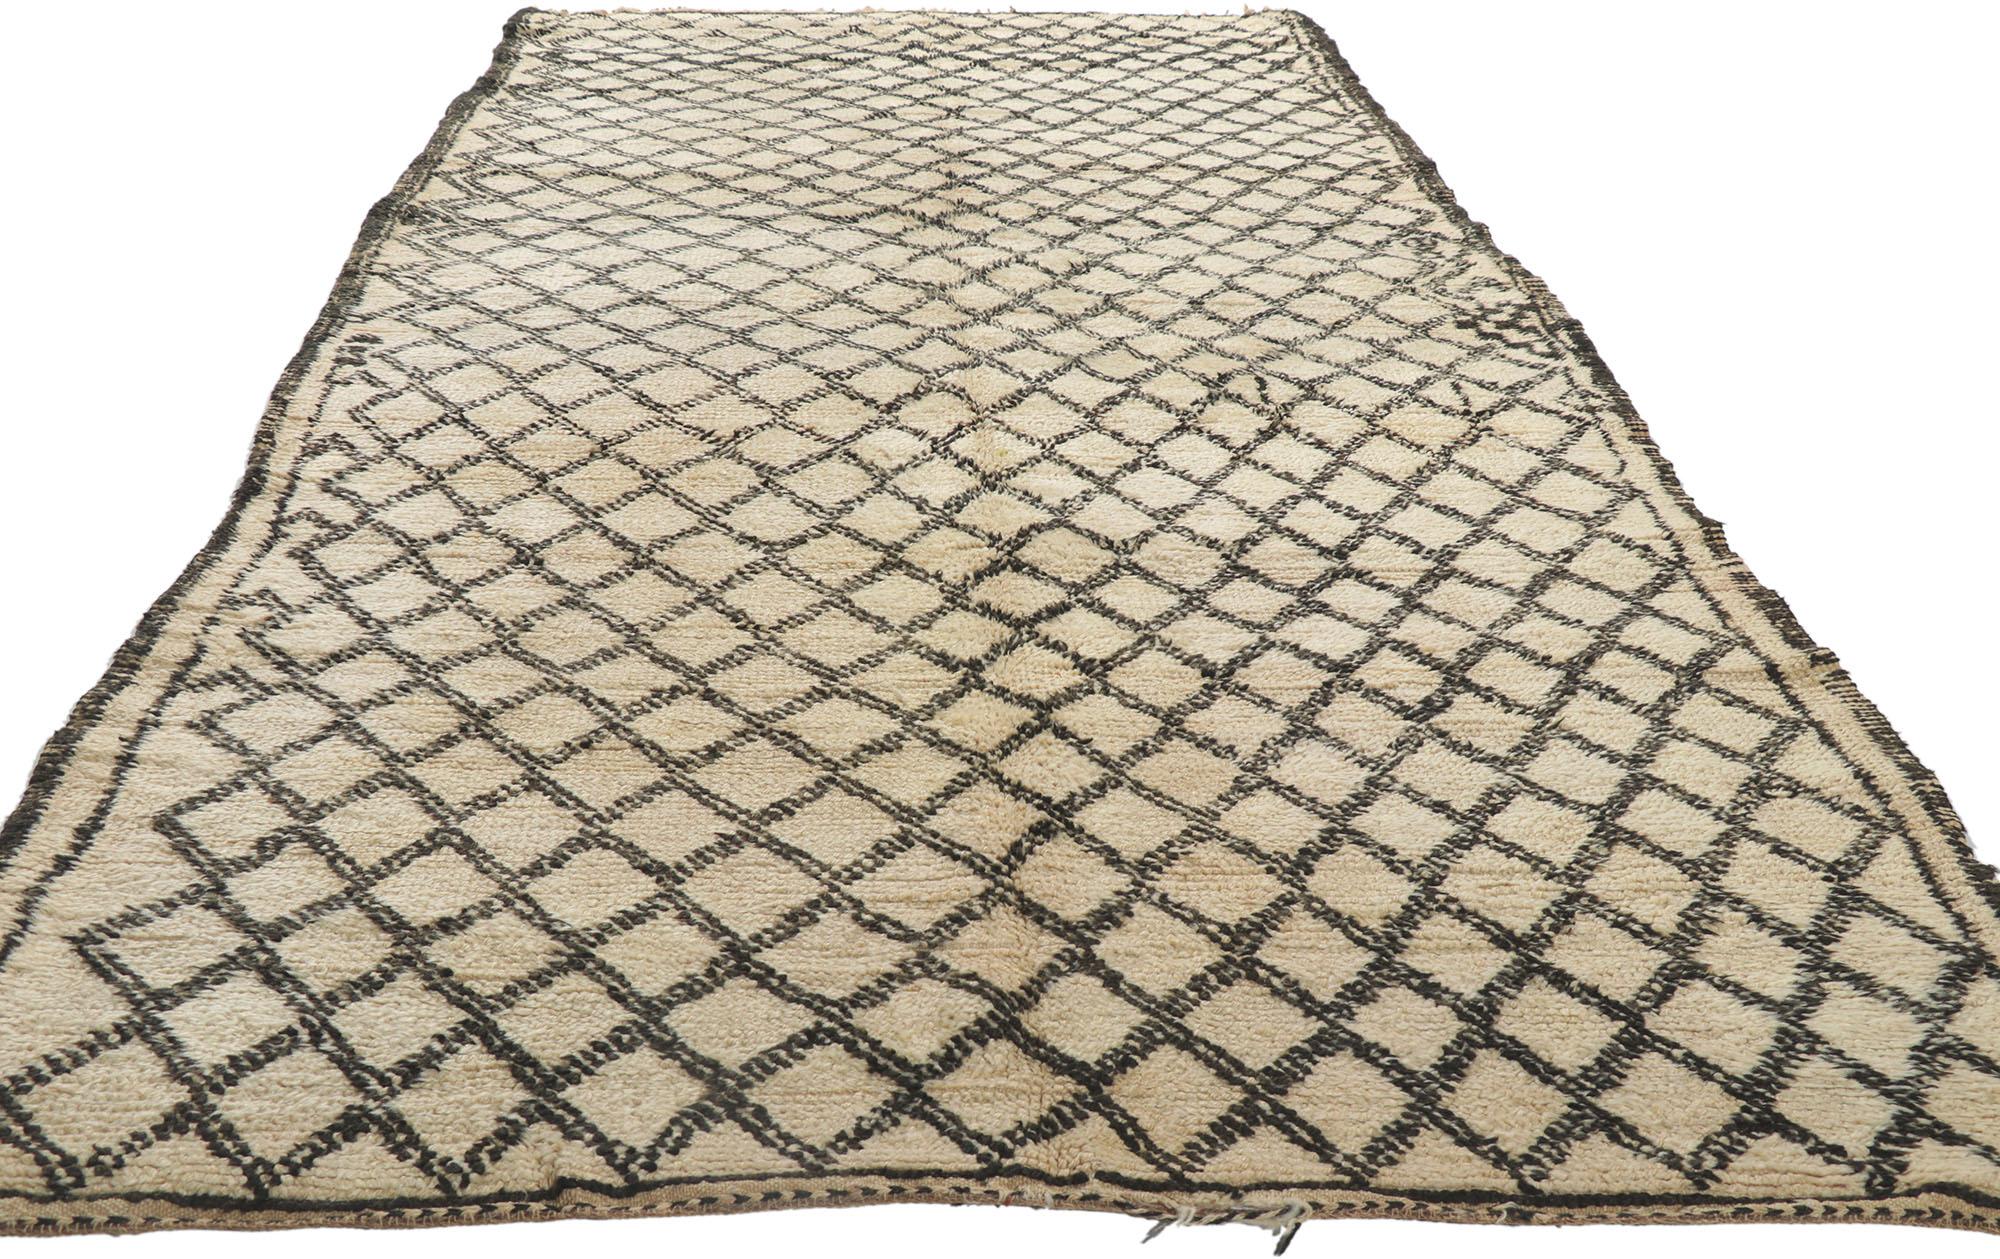 Hand-Knotted Vintage Beni Ourain Moroccan Rug, Midcentury Modern Meets Tribal Enchantment For Sale